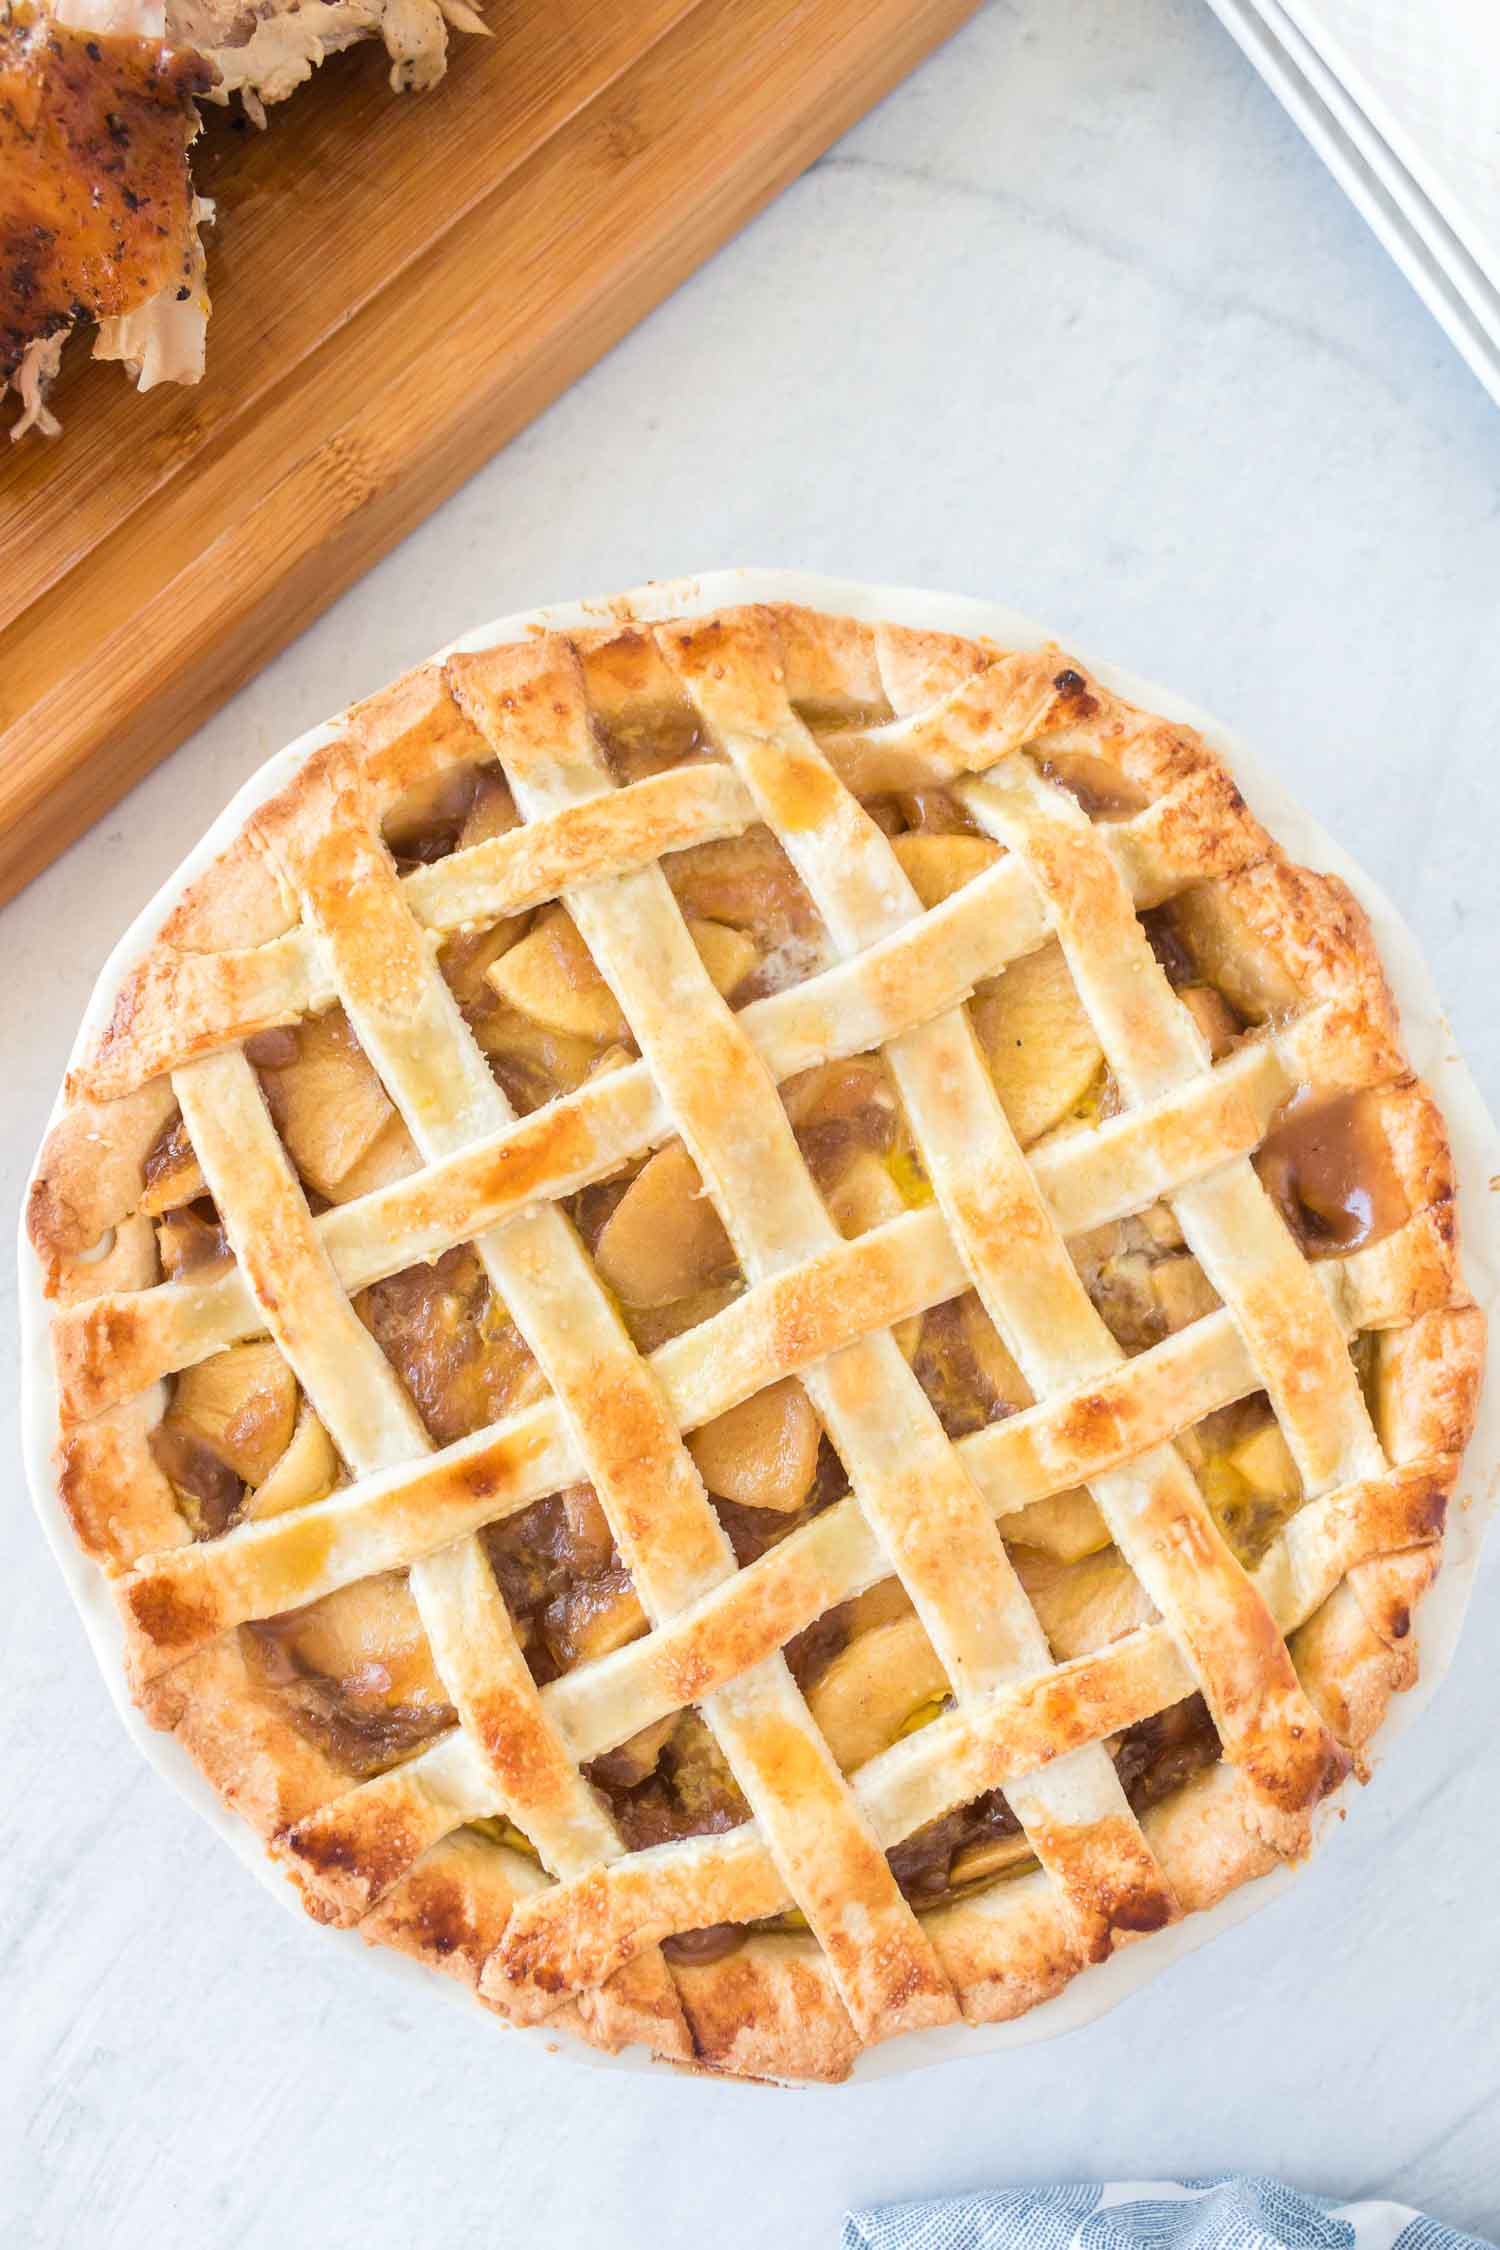 A baked apple pie with a wooden cutting board with turkey on it.